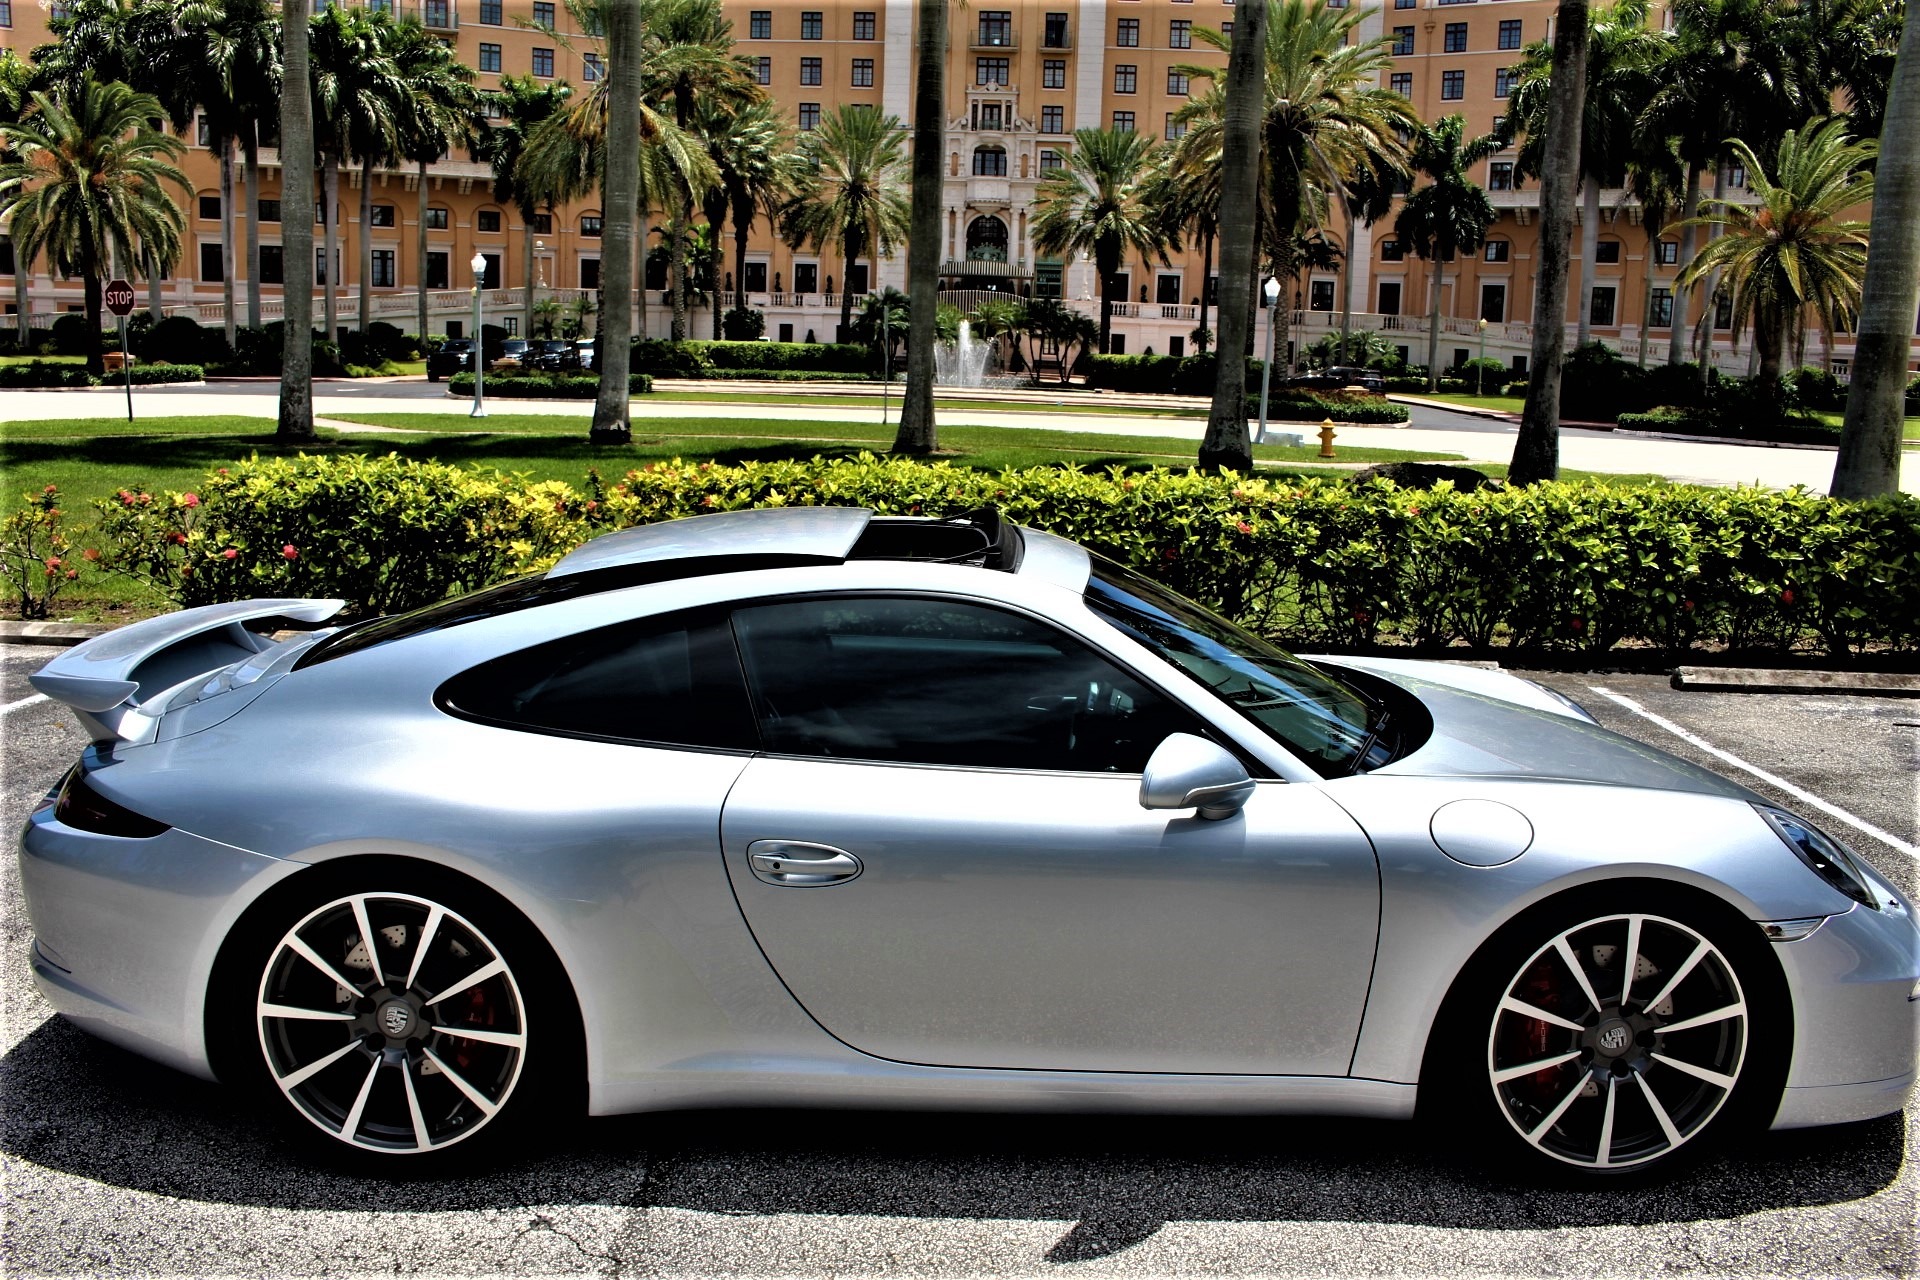 Used 2014 Porsche 911 Carrera S for sale Sold at The Gables Sports Cars in Miami FL 33146 4